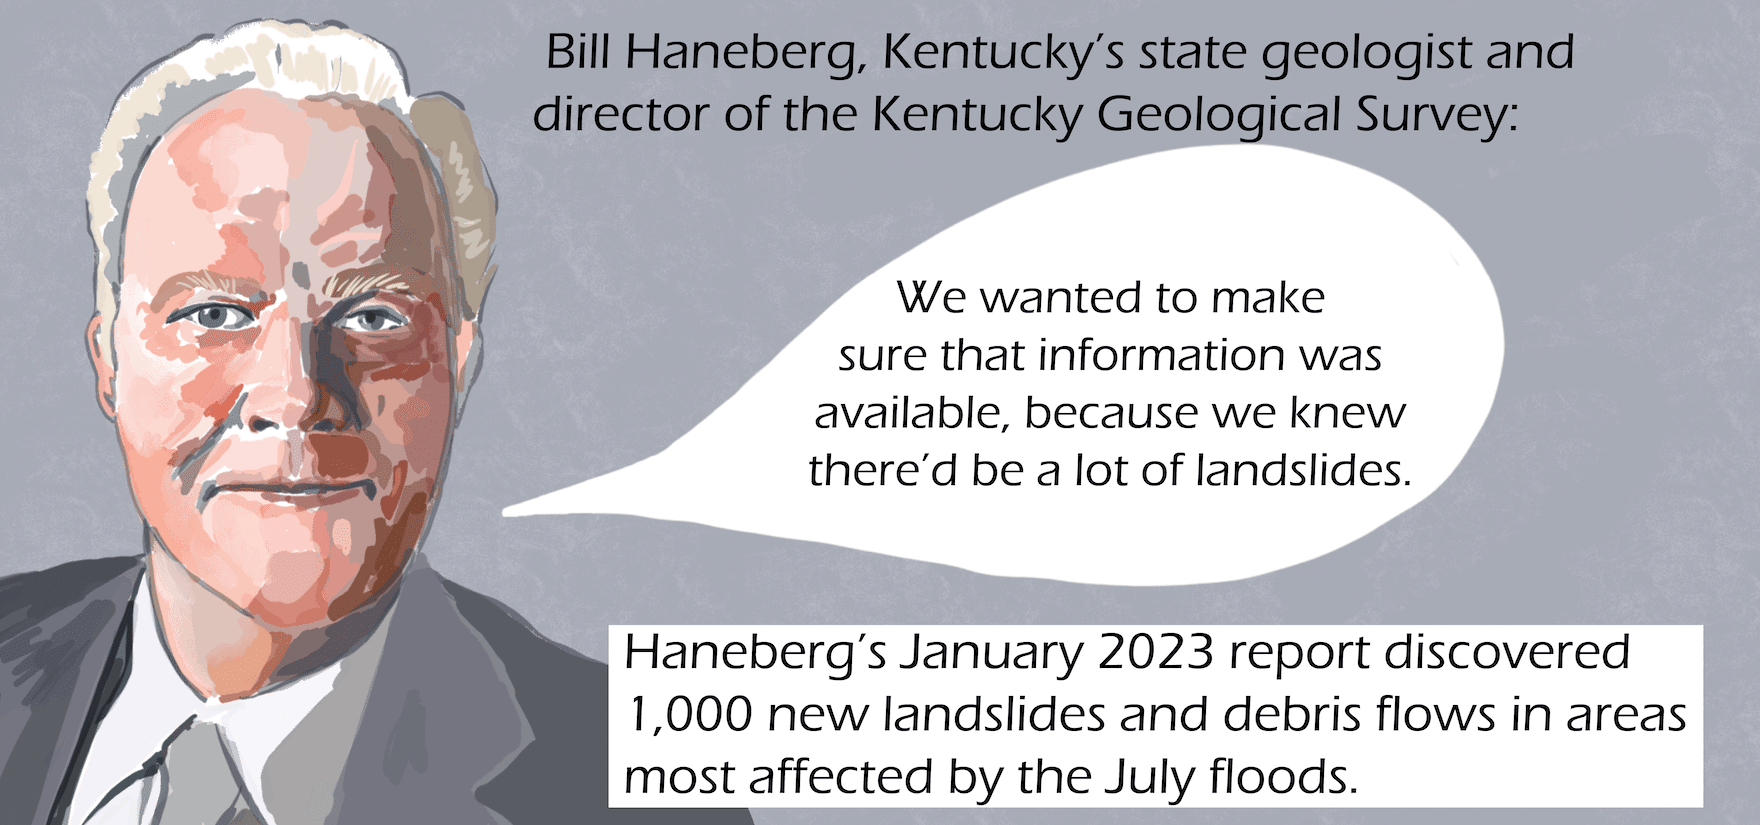 a man with white hair and a suit speaks. Text: Haneberg’s January report discovered 1,000 new landslides and debris flows in areas most affected by the July floods. Bill Haneberg: “We wanted to make sure that information was available, because we knew there’d be a lot of landslides.”